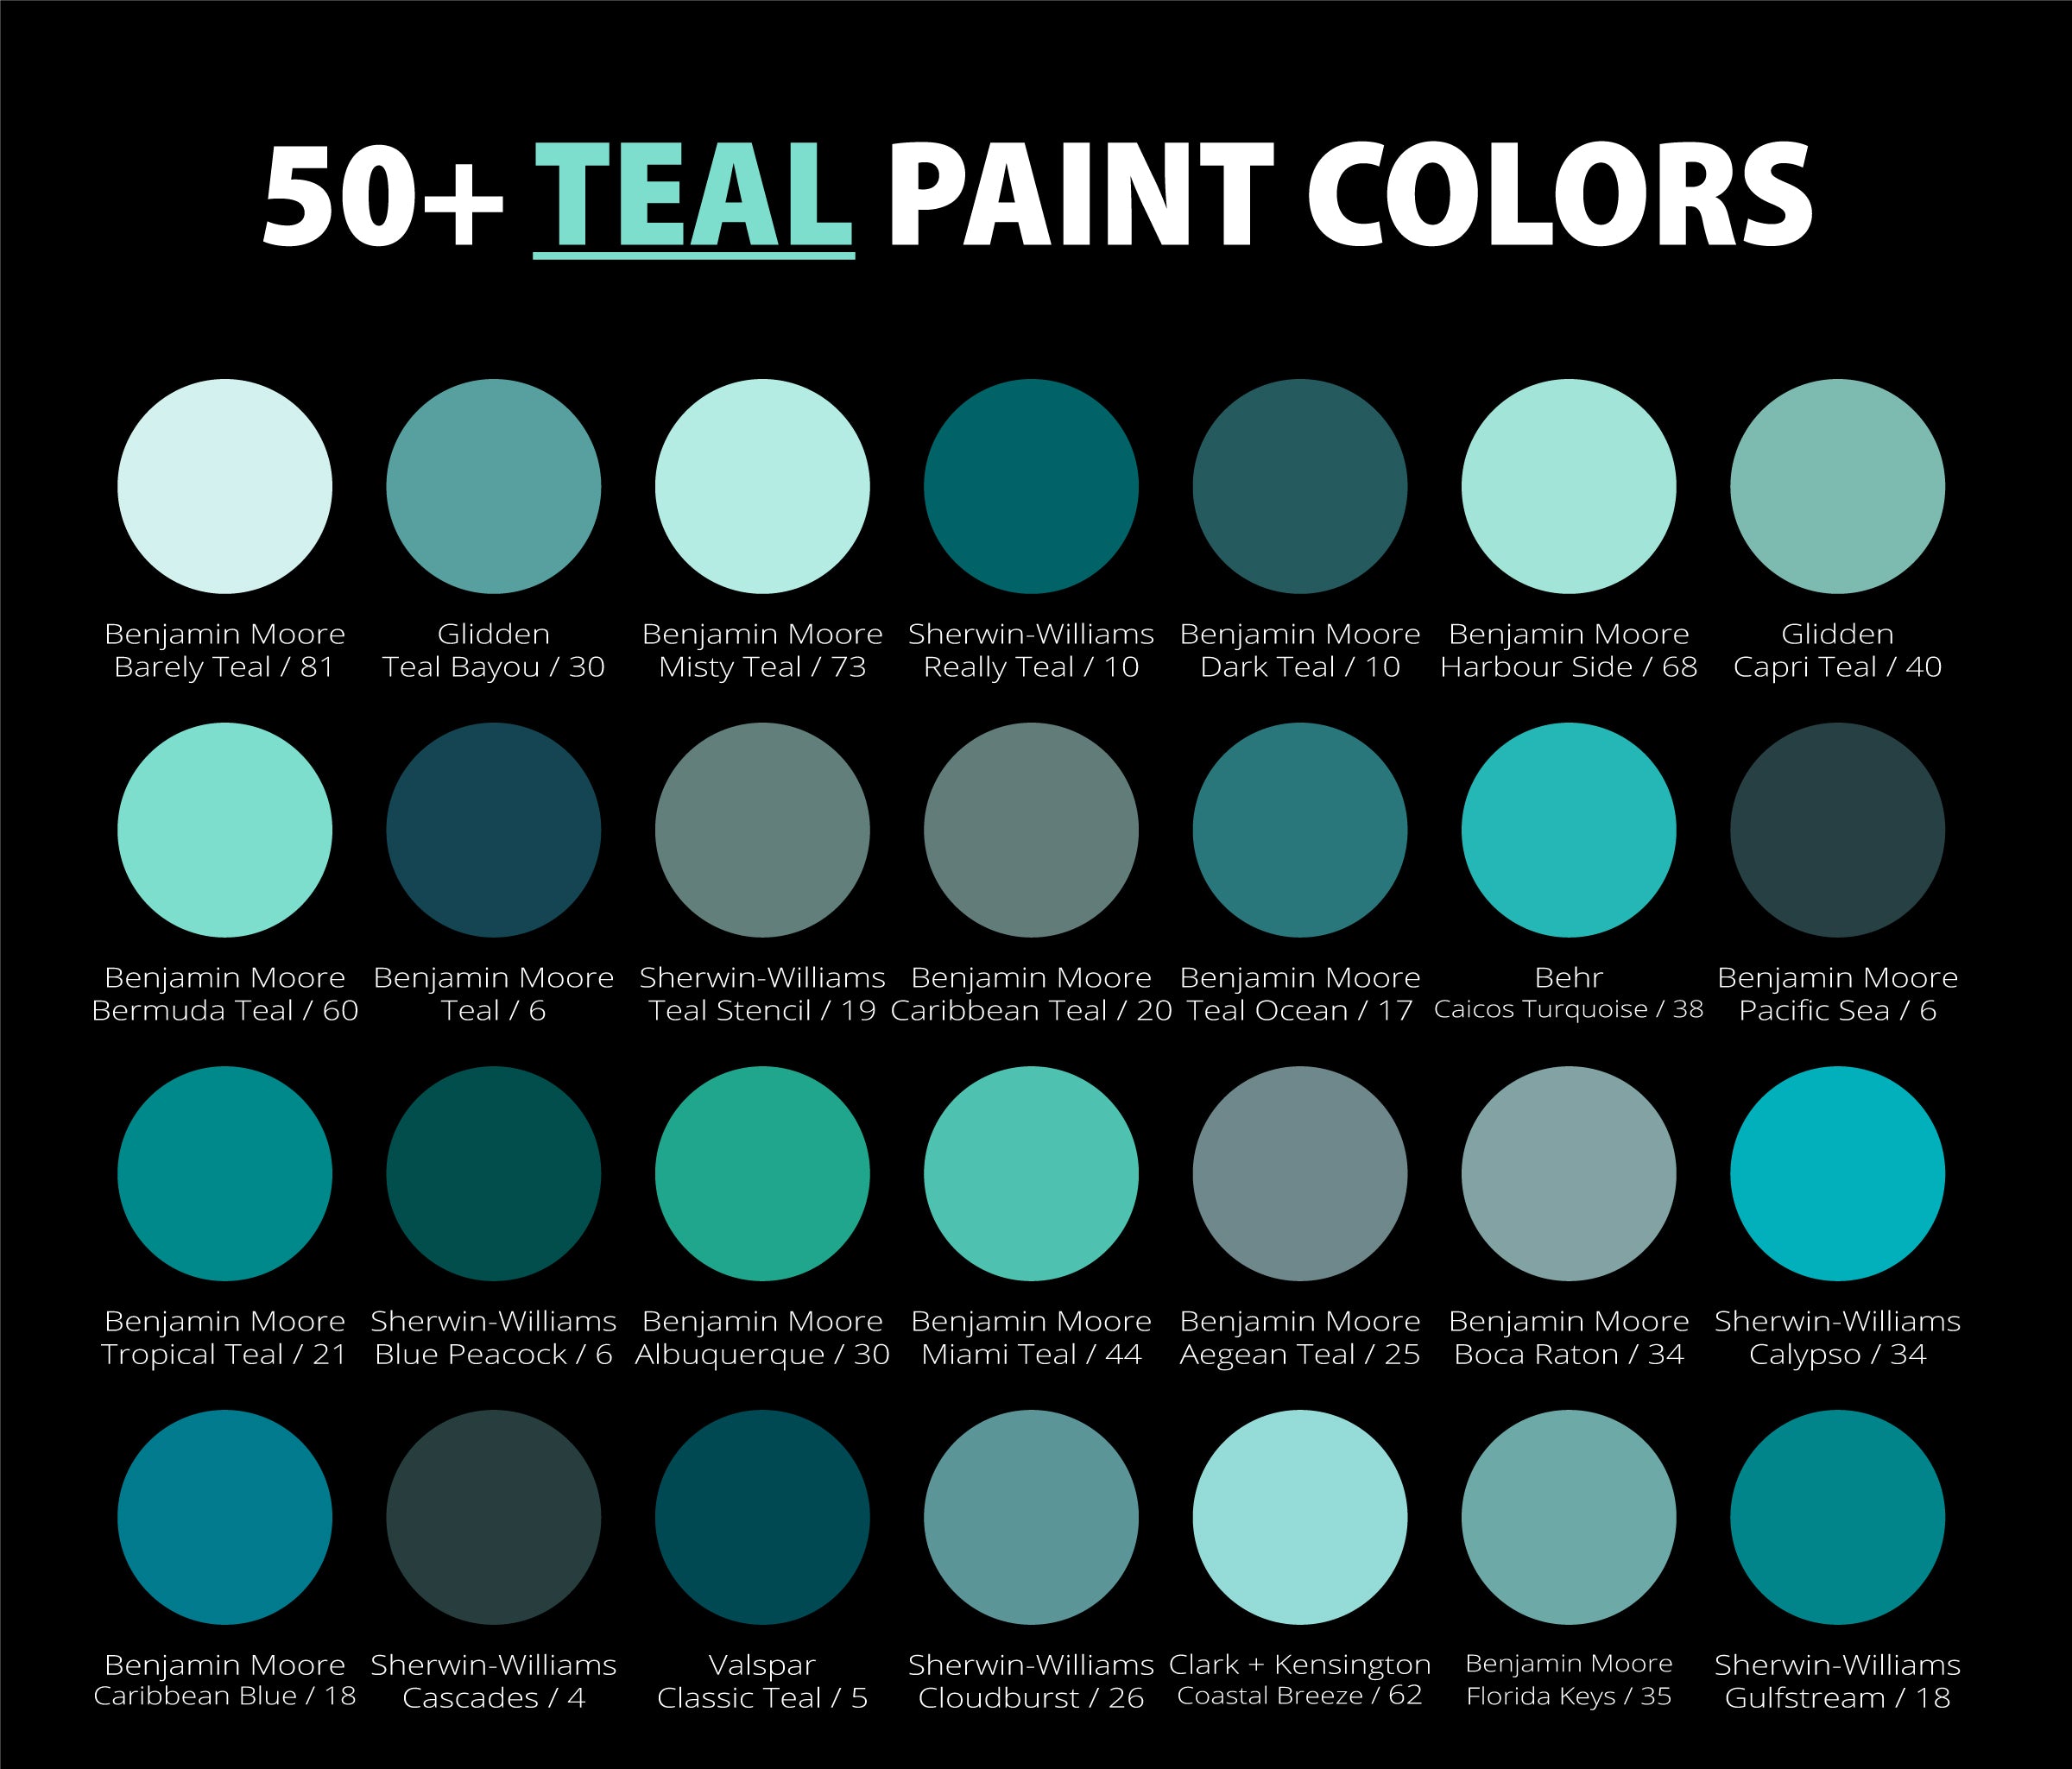 Best-Teal-Paint-Colors-with-Names-Colors-and-LRV-values-dark-background